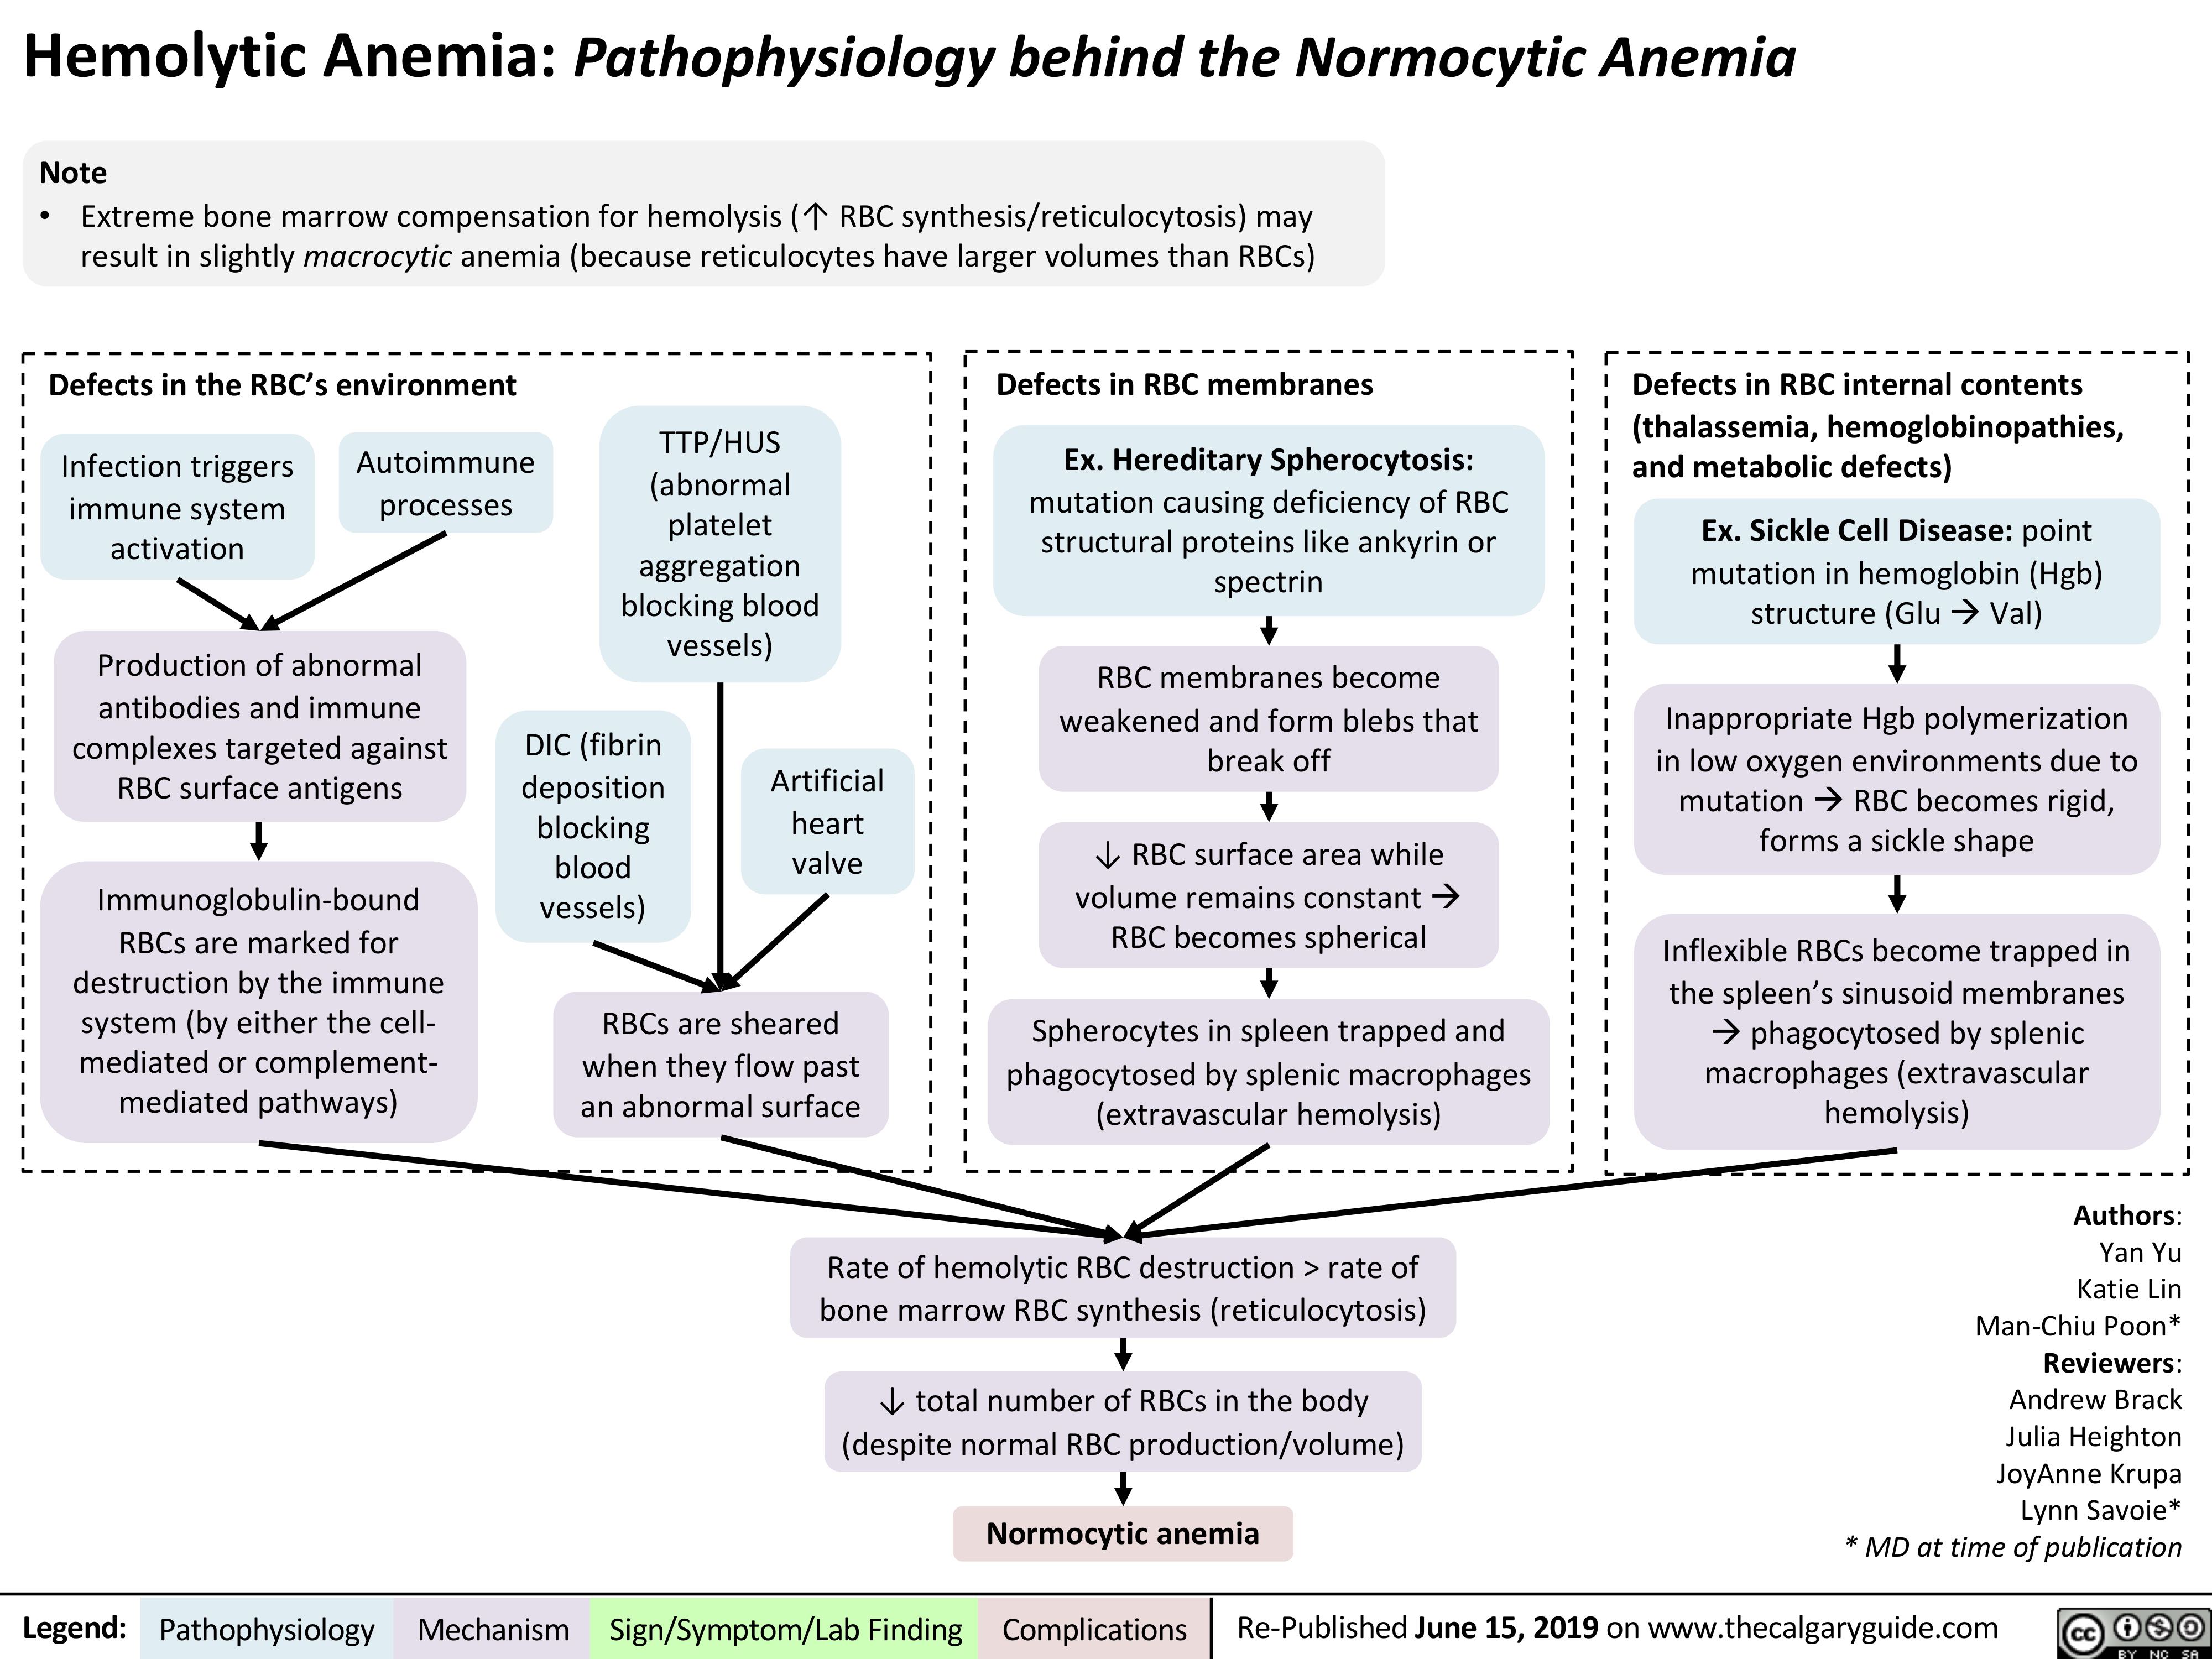 Hemolytic Anemia: Pathophysiology behind the Normocytic Anemia
Note
• Extreme bone marrow compensation for hemolysis (↑ RBC synthesis/reticulocytosis) may result in slightly macrocytic anemia (because reticulocytes have larger volumes than RBCs)
    Defects in the RBC’s environment
Defects in RBC membranes
Ex. Hereditary Spherocytosis:
mutation causing deficiency of RBC structural proteins like ankyrin or spectrin
RBC membranes become weakened and form blebs that break off
↓ RBC surface area while volume remains constantà RBC becomes spherical
Spherocytes in spleen trapped and phagocytosed by splenic macrophages (extravascular hemolysis)
Defects in RBC internal contents (thalassemia, hemoglobinopathies, and metabolic defects)
Ex. Sickle Cell Disease: point mutation in hemoglobin (Hgb) structure (GluàVal)
Inappropriate Hgb polymerization in low oxygen environments due to mutationàRBC becomes rigid, forms a sickle shape
Inflexible RBCs become trapped in the spleen’s sinusoid membranes àphagocytosed by splenic macrophages (extravascular hemolysis)
    Infection triggers immune system activation
Autoimmune processes
TTP/HUS (abnormal platelet aggregation blocking blood vessels)
    Production of abnormal
antibodies and immune complexes targeted against RBC surface antigens
Immunoglobulin-bound RBCs are marked for
destruction by the immune system (by either the cell- mediated or complement- mediated pathways)
DIC (fibrin deposition blocking blood vessels)
Artificial heart valve
                RBCs are sheared when they flow past an abnormal surface
     Rate of hemolytic RBC destruction > rate of bone marrow RBC synthesis (reticulocytosis)
↓ total number of RBCs in the body (despite normal RBC production/volume)
Normocytic anemia
Authors: Yan Yu Katie Lin Man-Chiu Poon* Reviewers: Andrew Brack Julia Heighton JoyAnne Krupa Lynn Savoie* * MD at time of publication
     Legend:
 Pathophysiology
 Mechanism
Sign/Symptom/Lab Finding
  Complications
Re-Published June 15, 2019 on www.thecalgaryguide.com
   